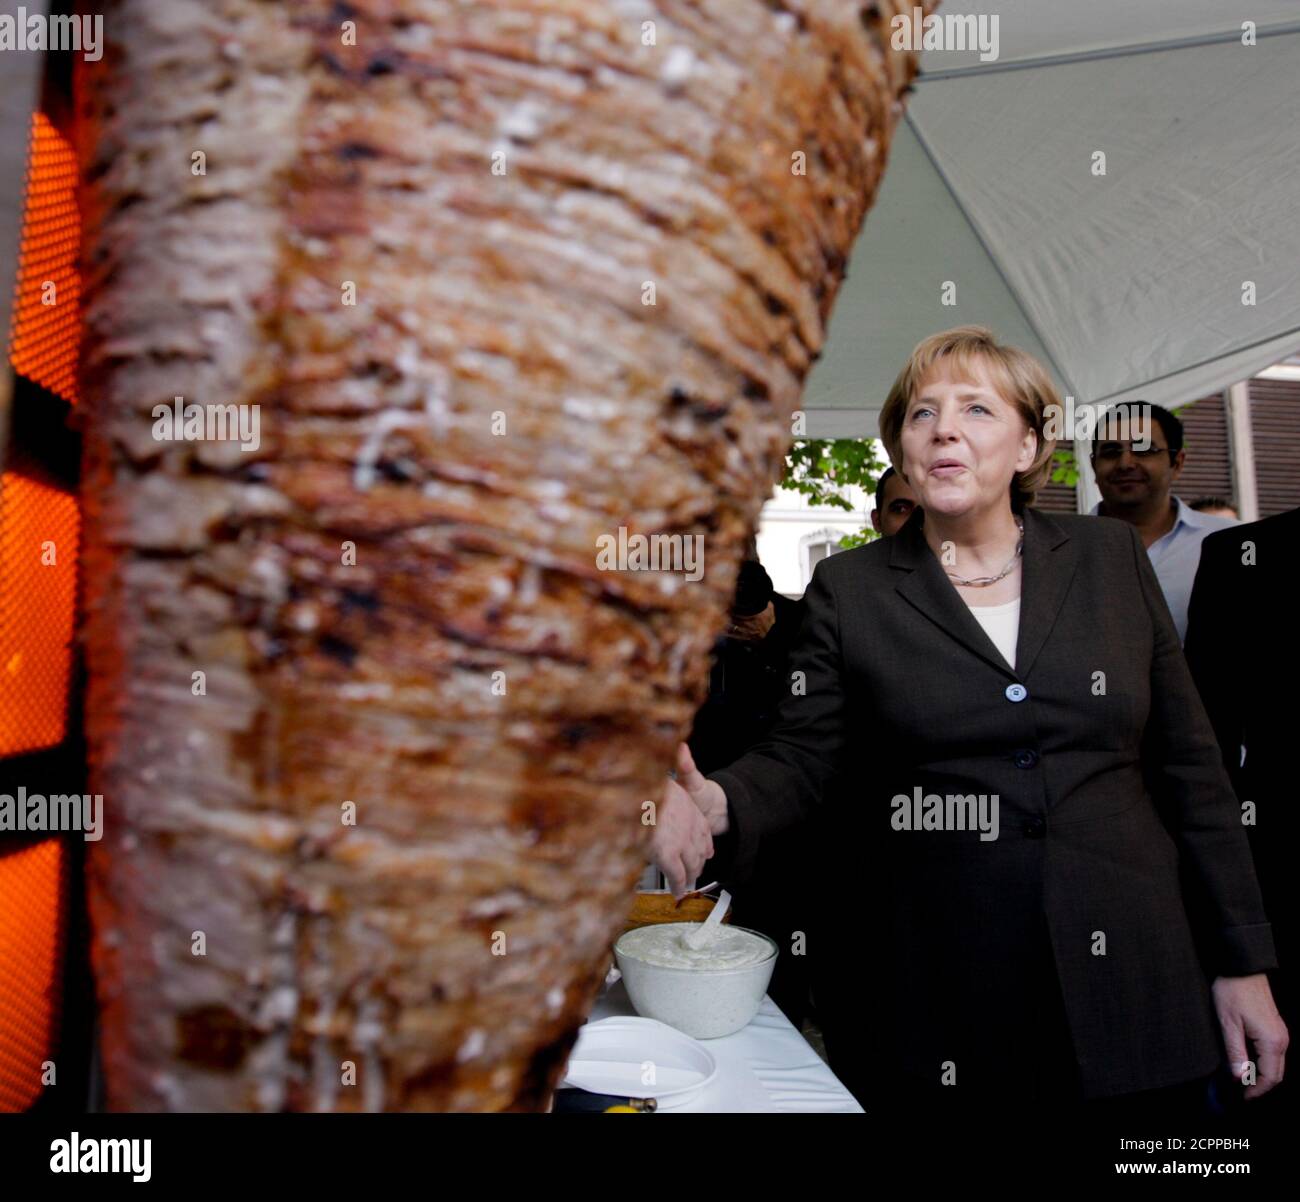 German Chancellor Angela Merkel looks at a kebab meat loaf at a reception of the medium-sized business parliamentary group (PKM) in Berlin, June 30, 2009.  REUTERS/Thomas Peter  (GERMANY POLITICS FOOD BUSINESS) Stock Photo